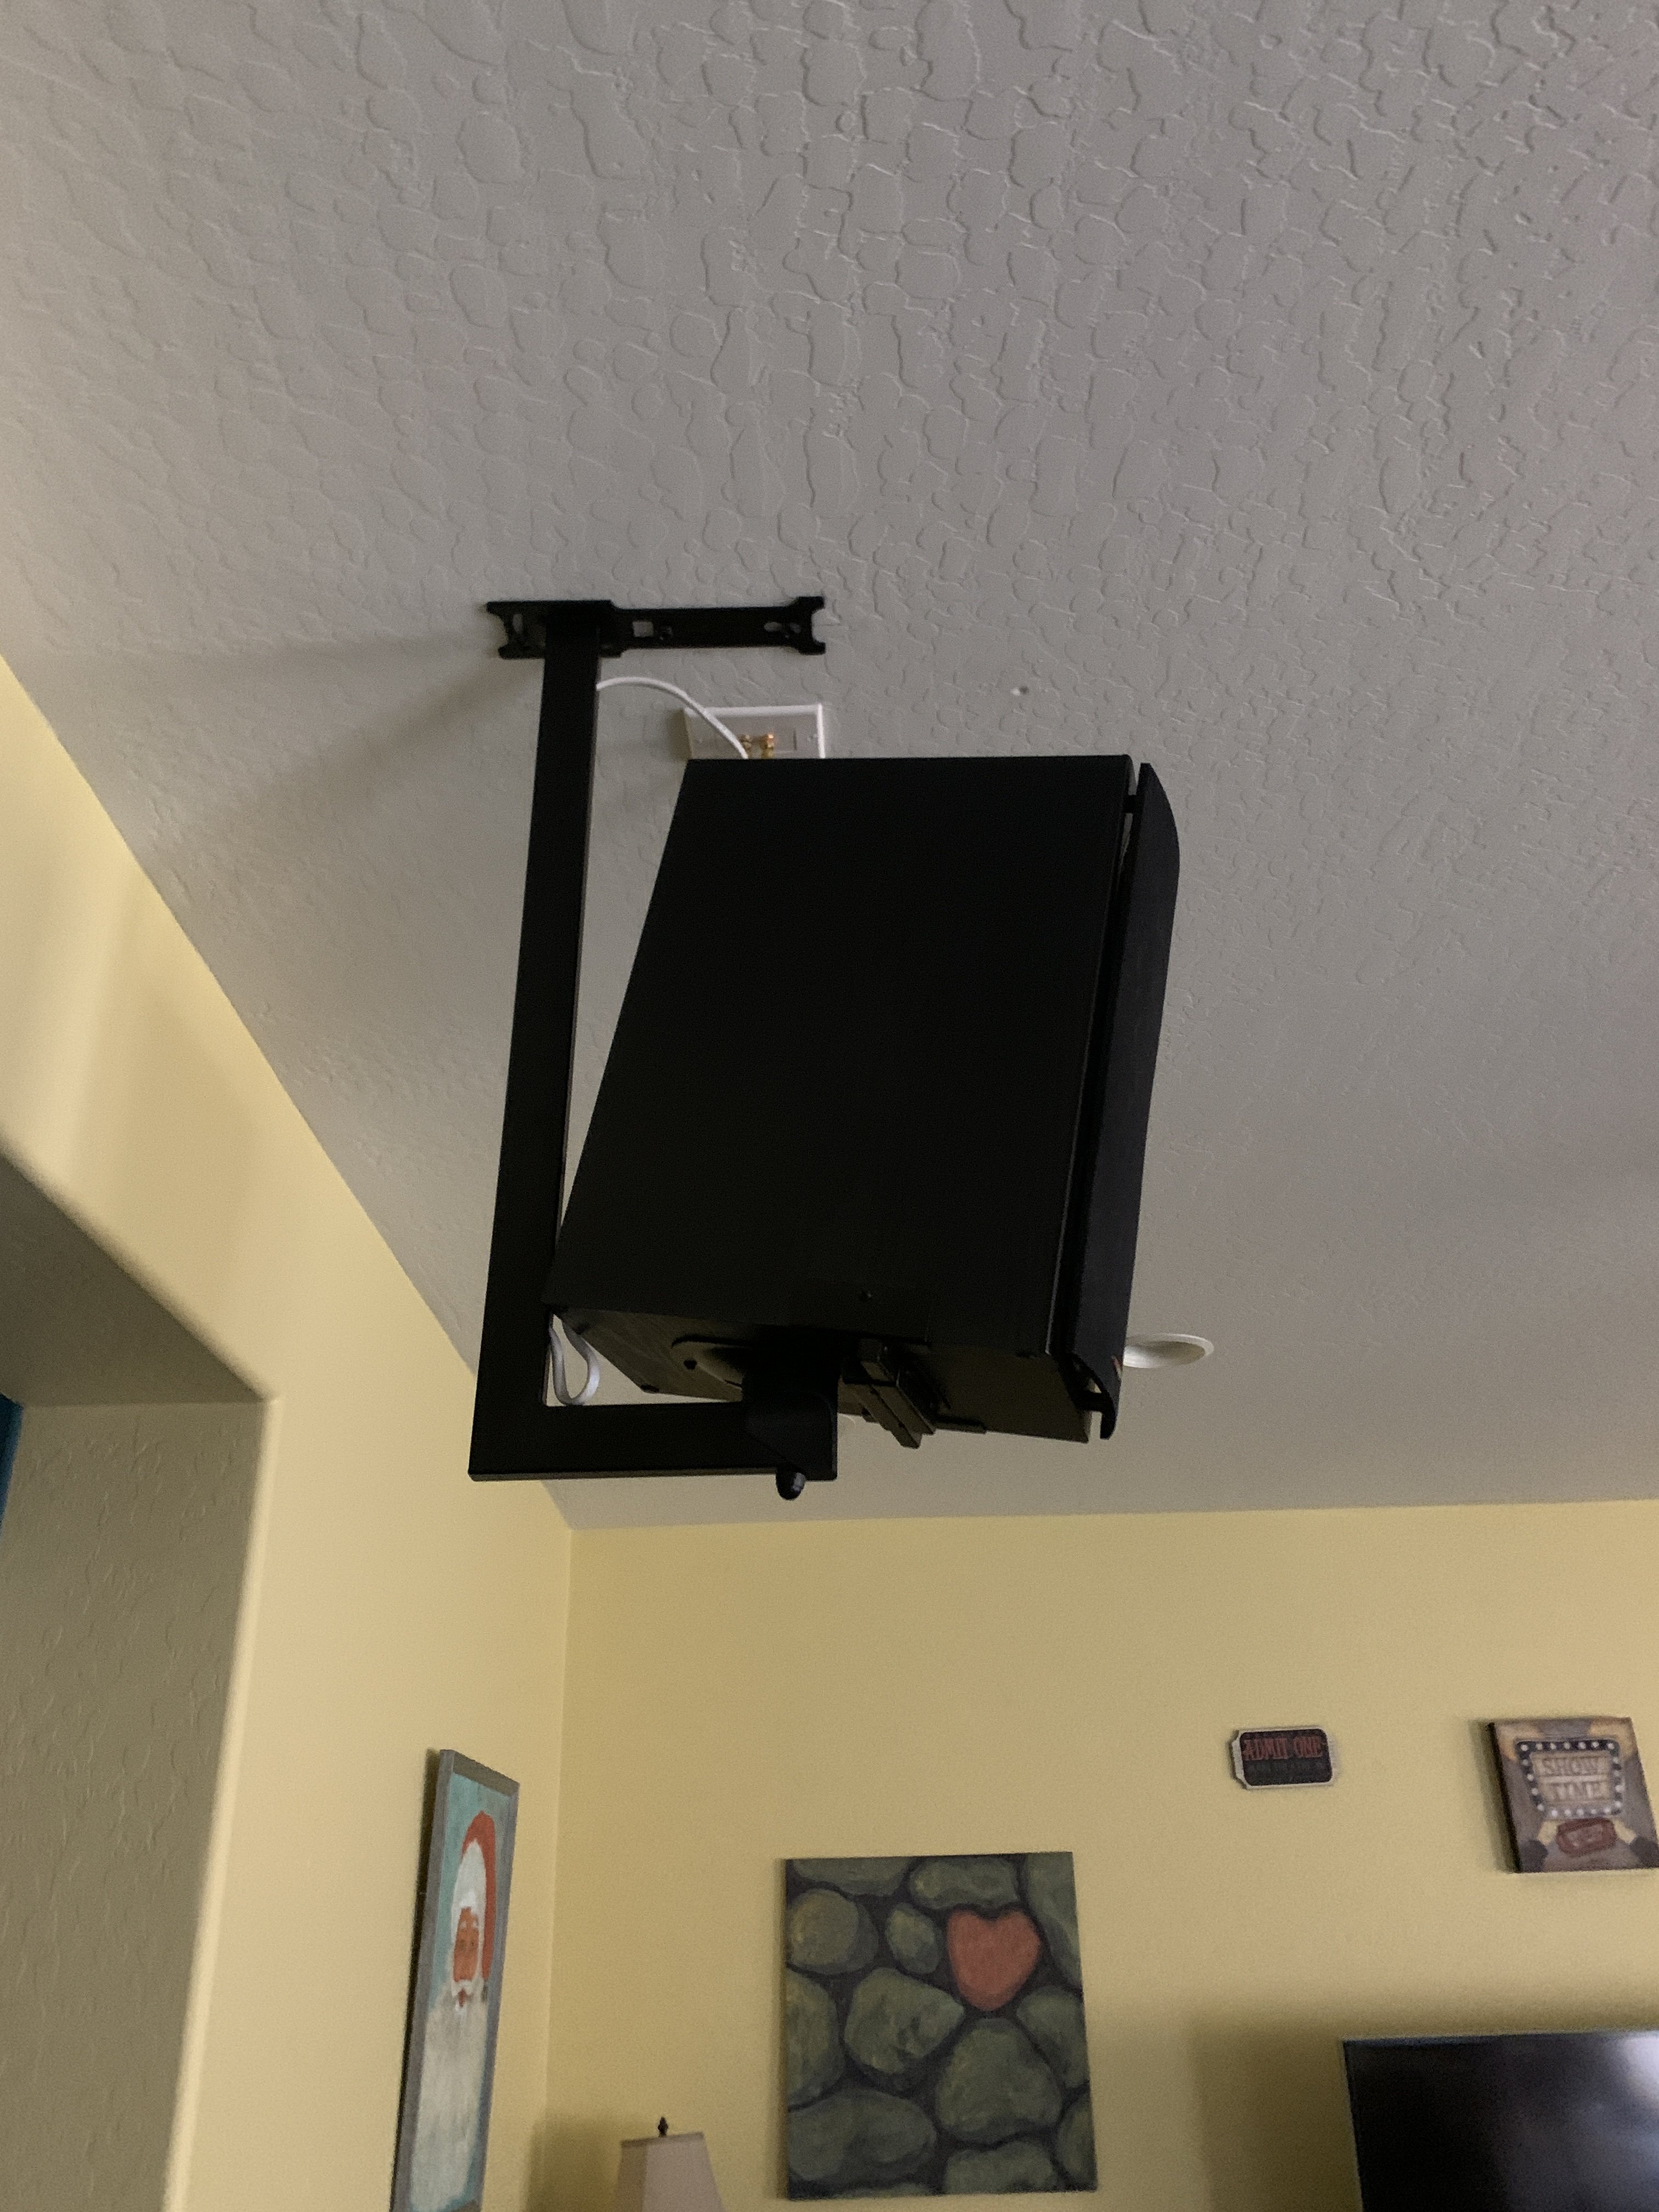 Ceiling Mounting Bookshelf Speakers, Mounting Surround Sound Speakers On Ceiling